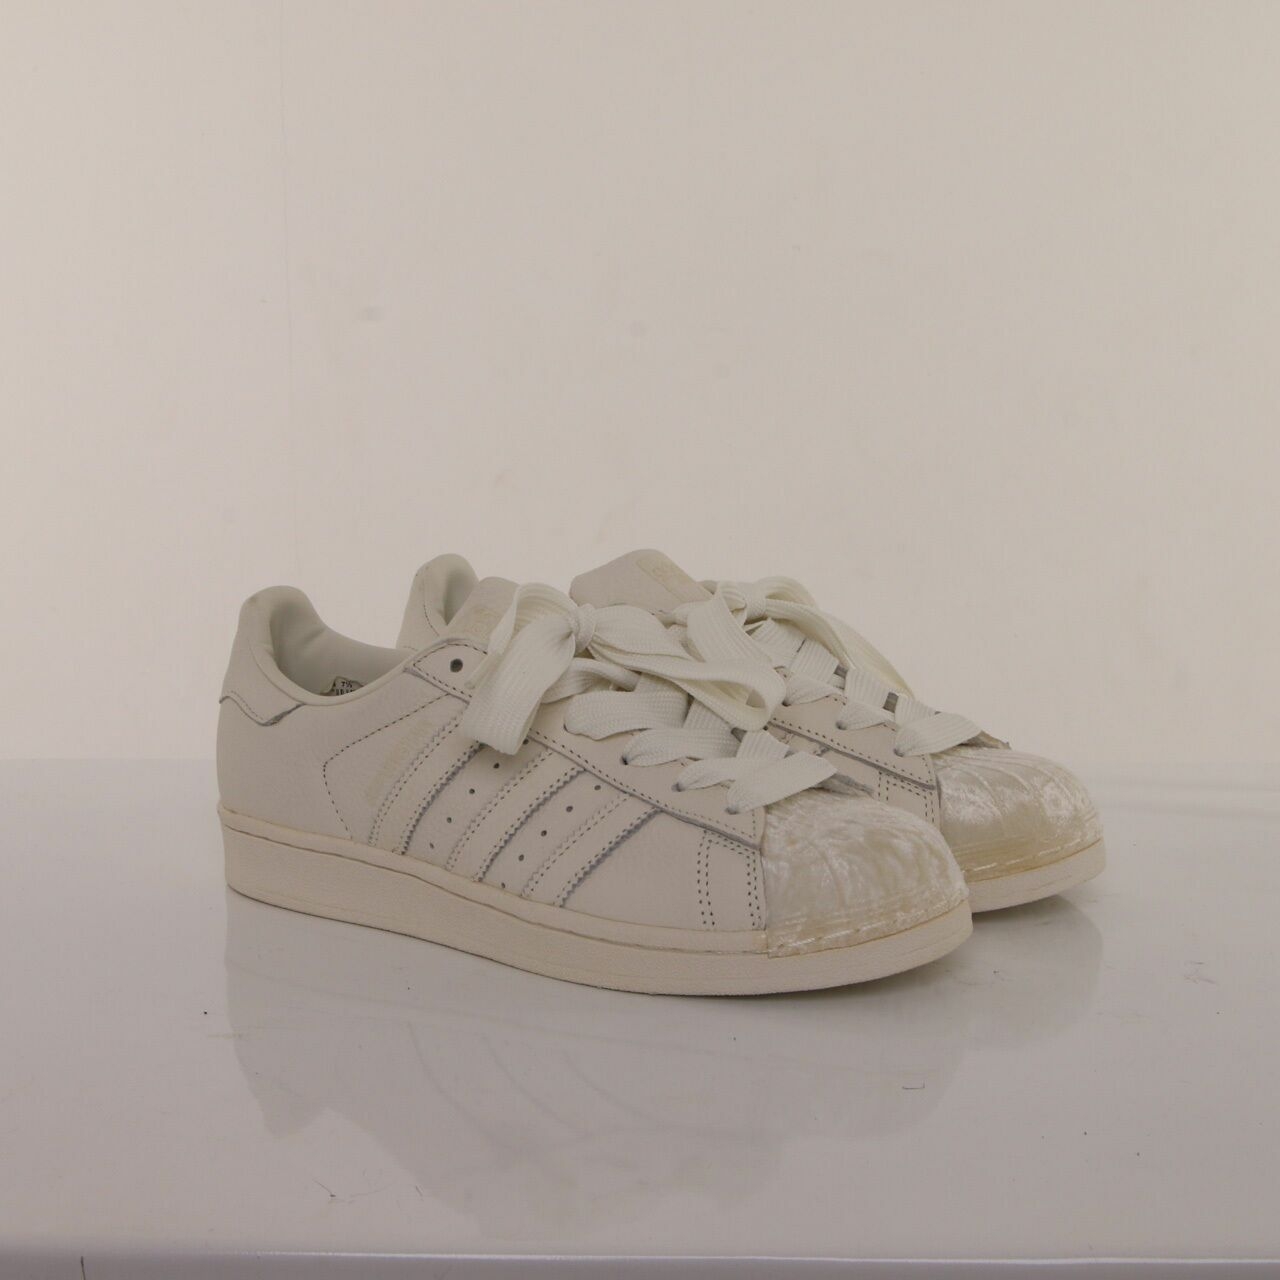 Adidas Superstar White Sneakers